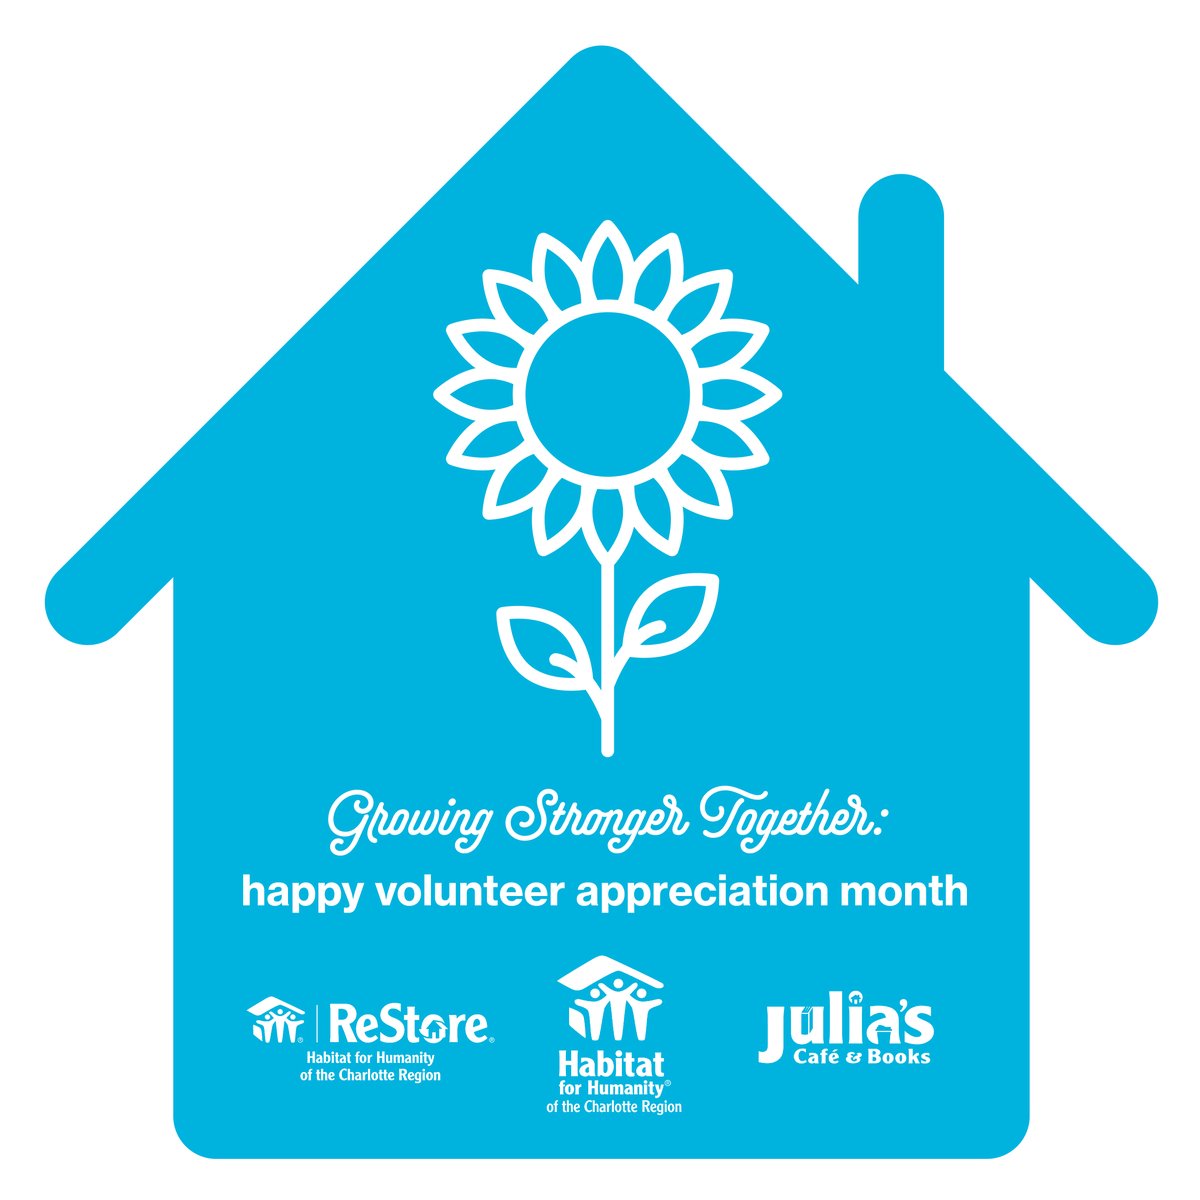 Happy #VolunteerAppreciationMonth! Volunteers help us grow and make our mission possible.🌻 Our volunteers have put in more than 35,000 hours and have helped us serve 266 families so far this fiscal year. From all of us at Habitat Charlotte Region, thank you for all that you do!